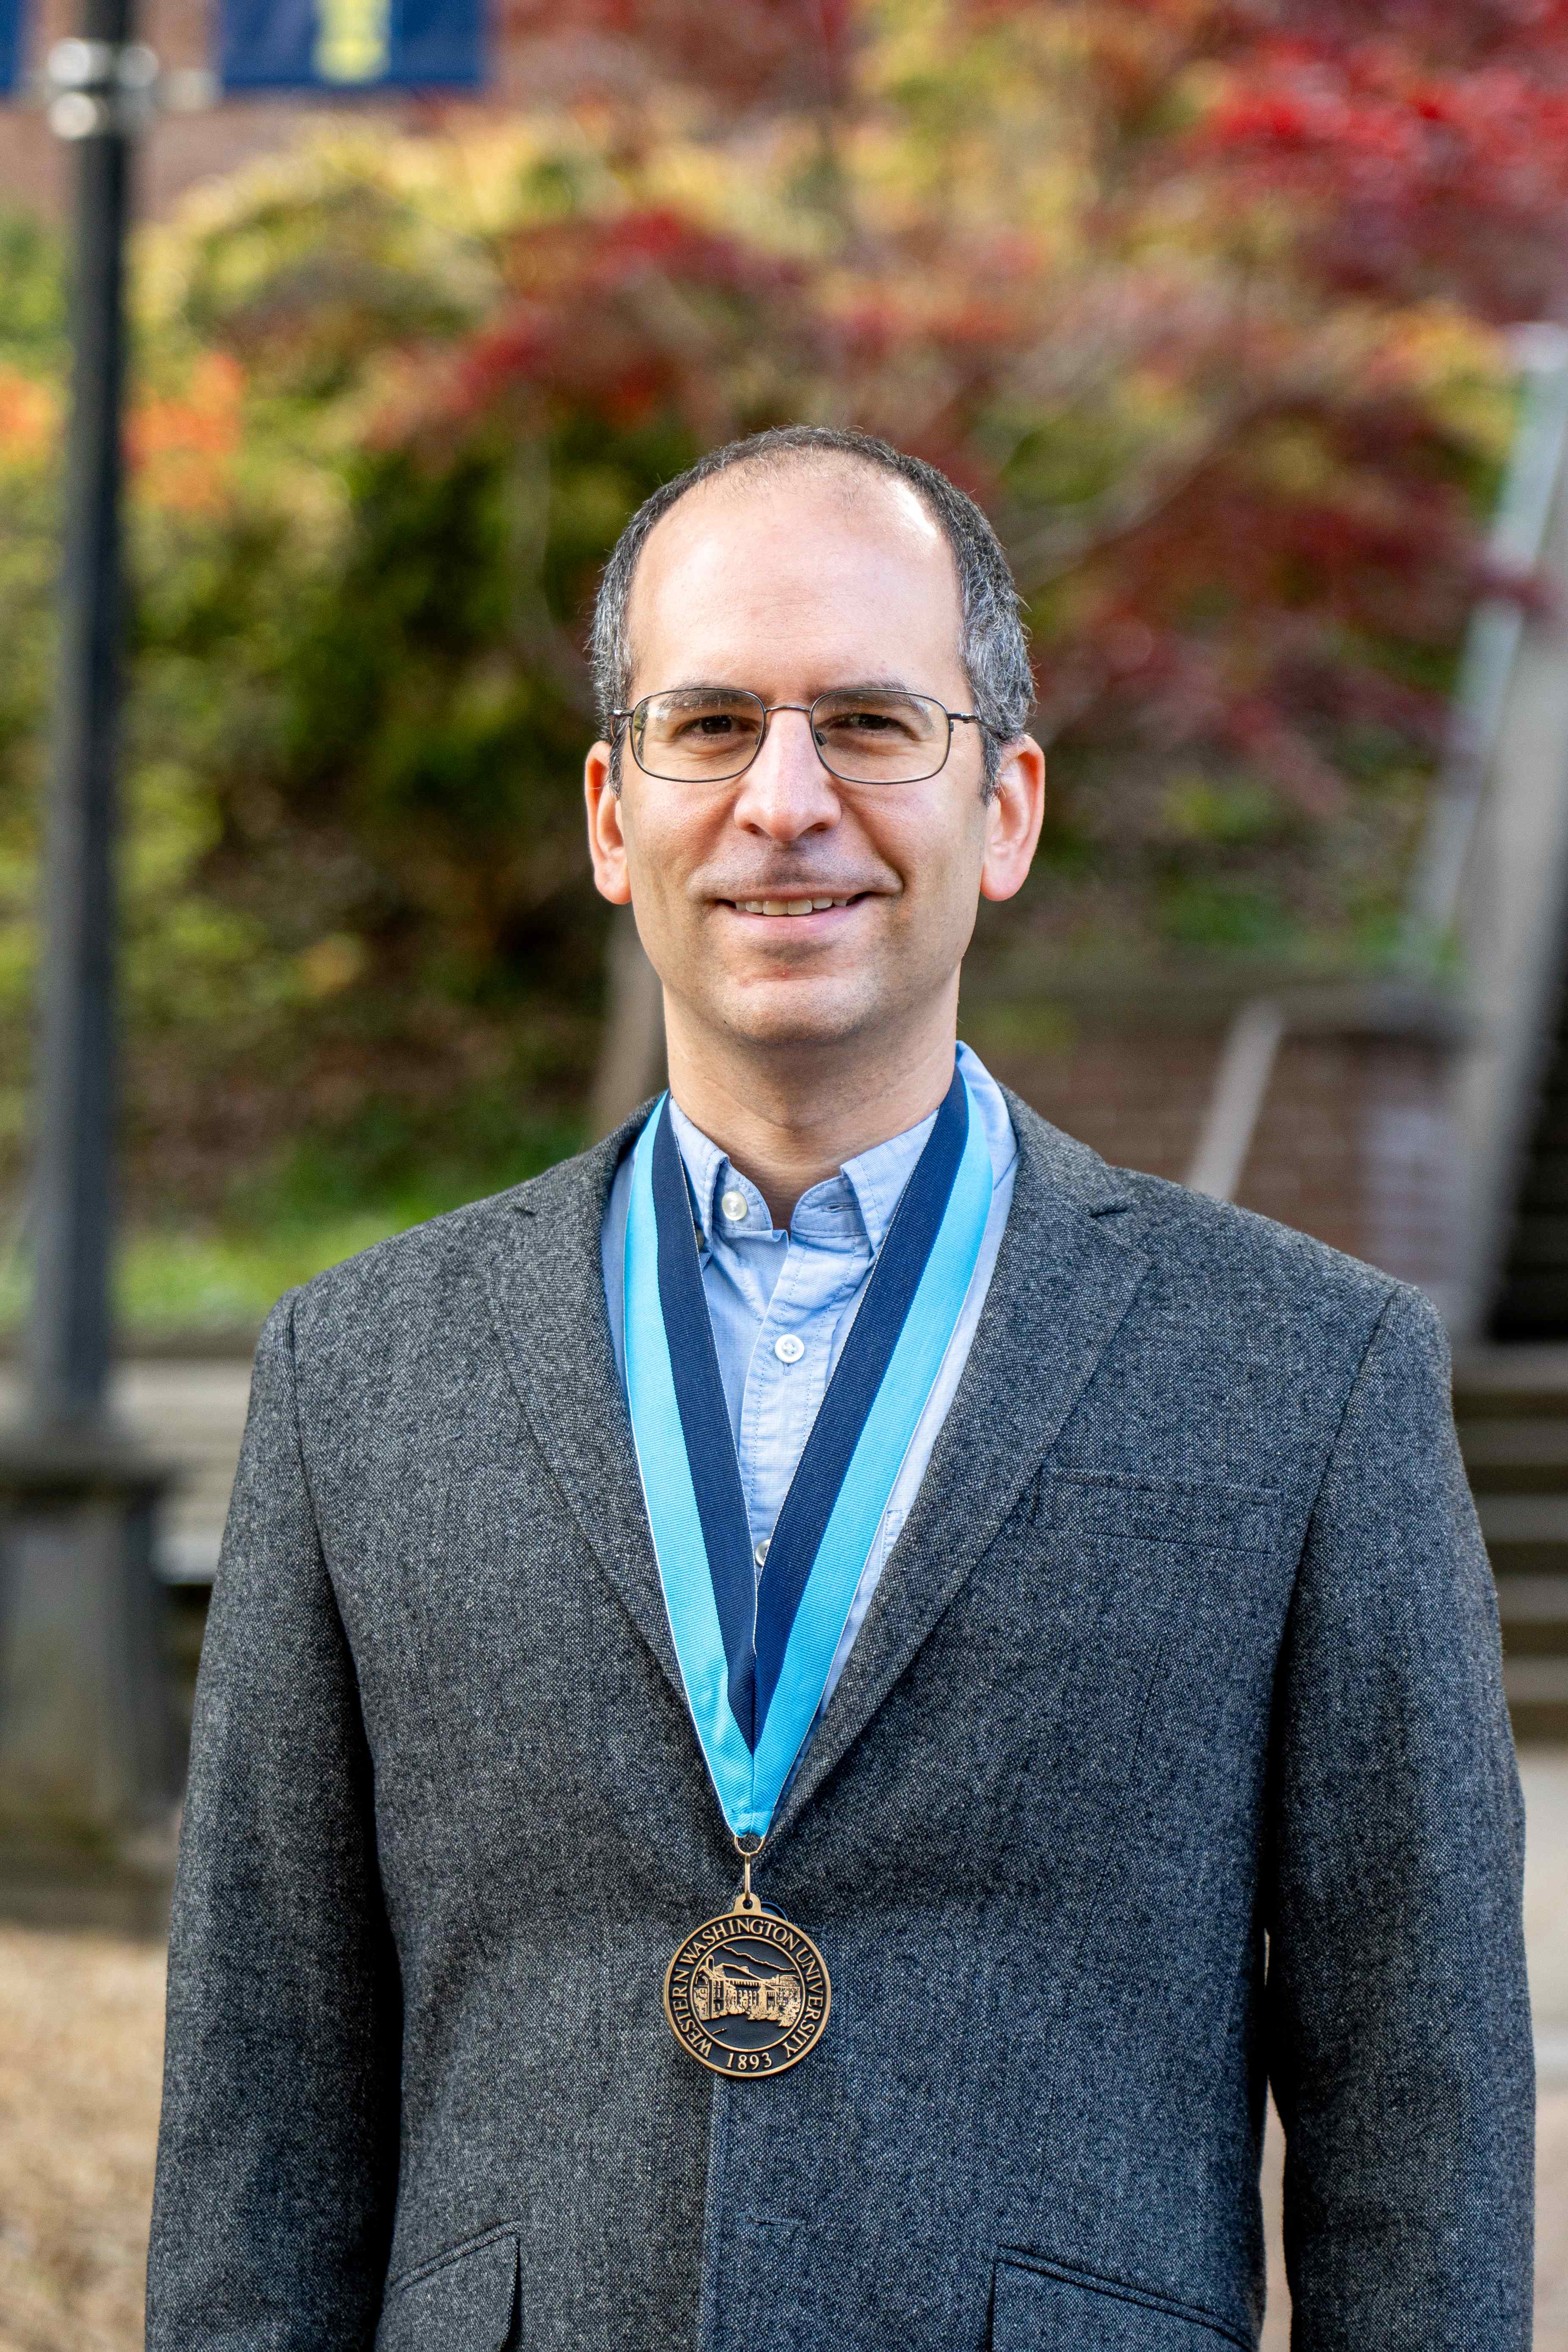 Dr. Robert Berger stands in front of Old Main wearing a tweed blazer and WWU award medallion